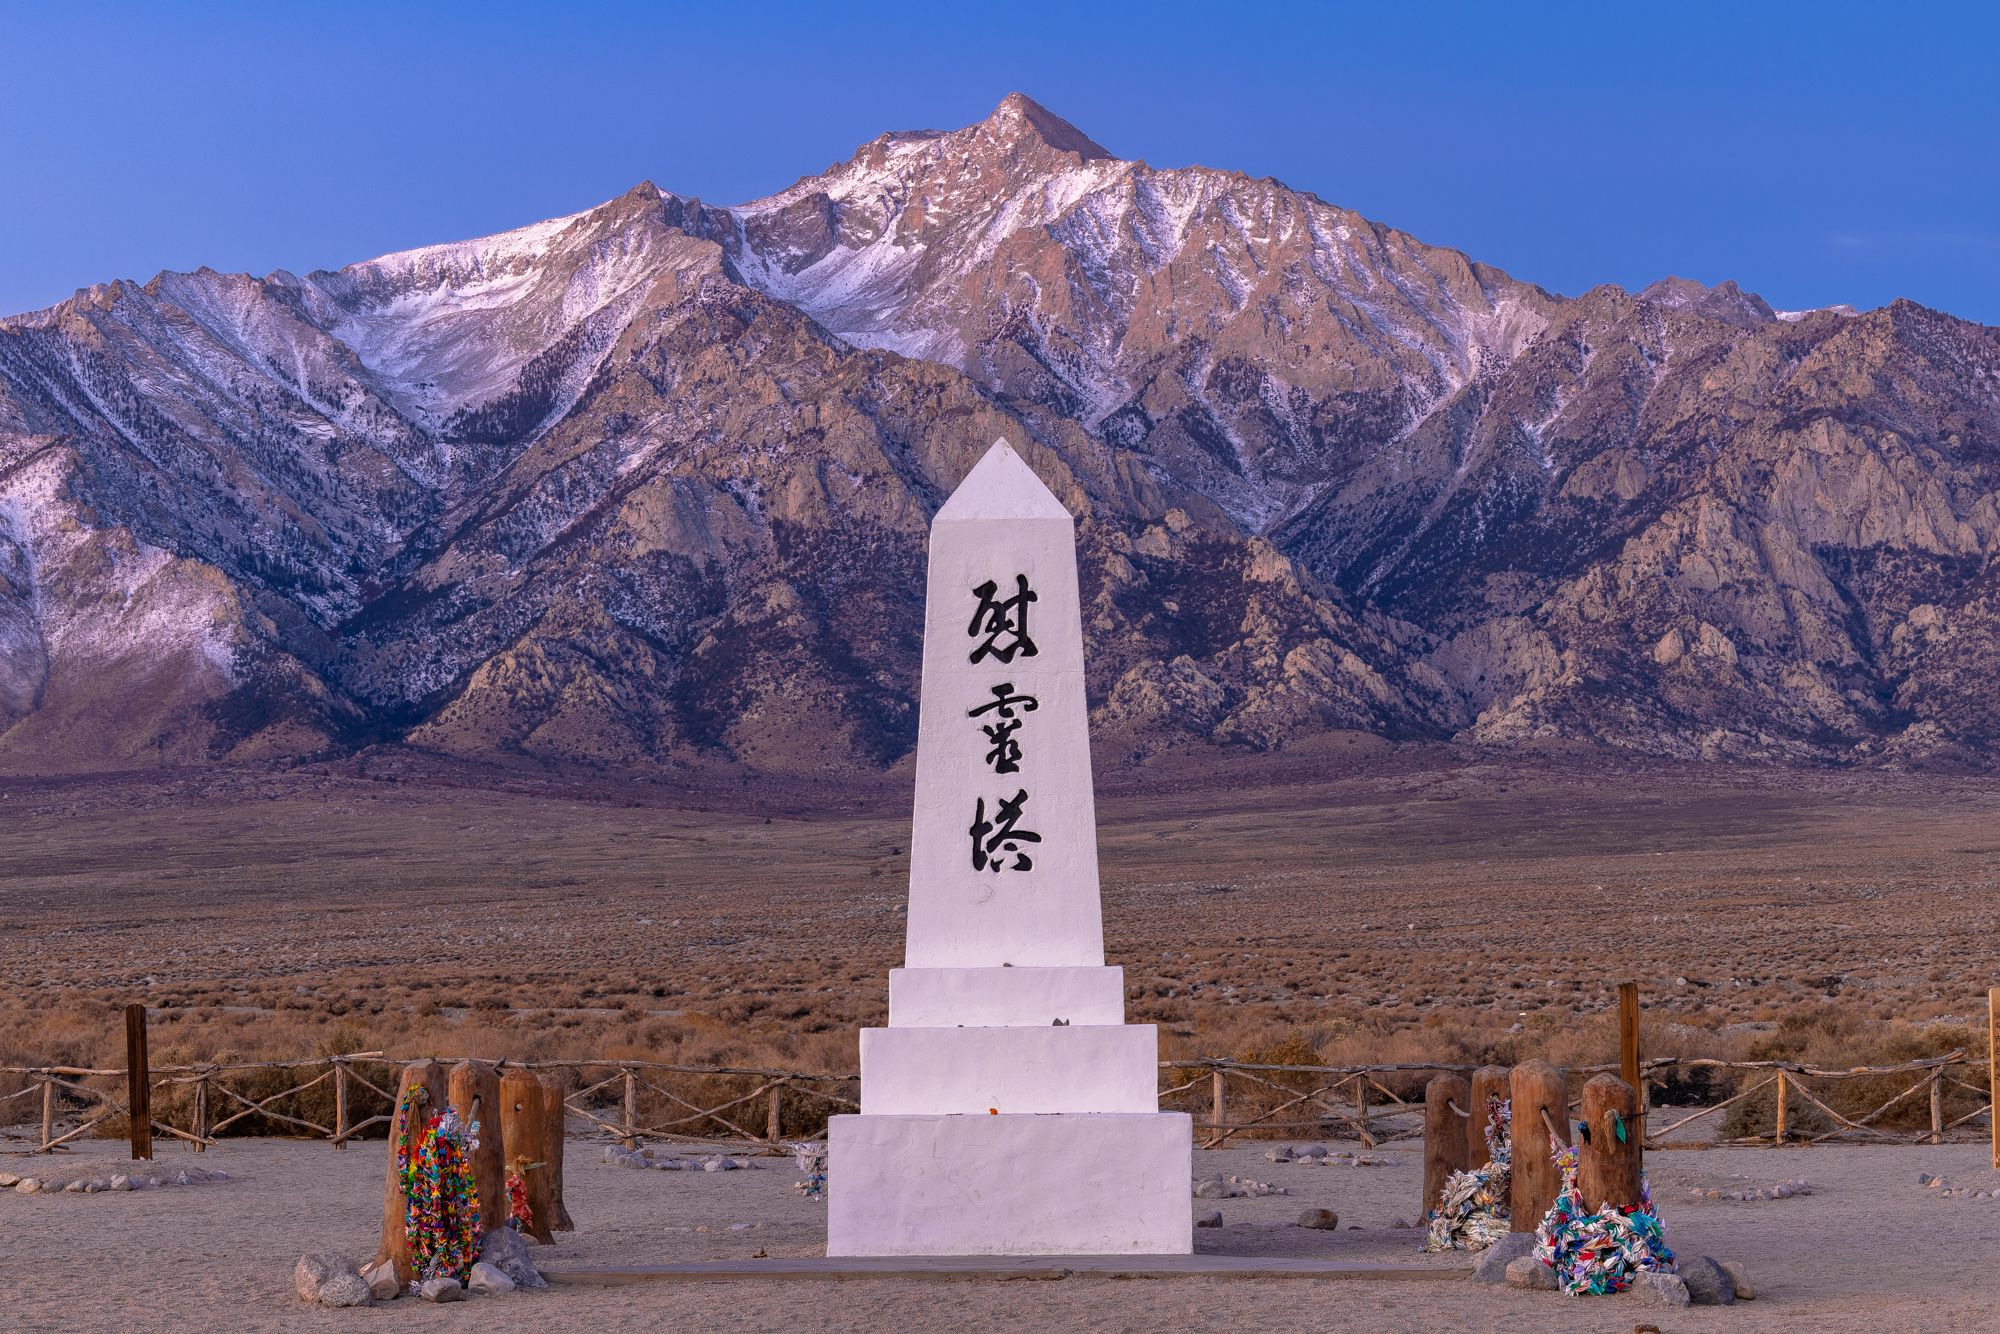 Sunrise at the soul-consoling tower in Manzanar (慰靈塔)